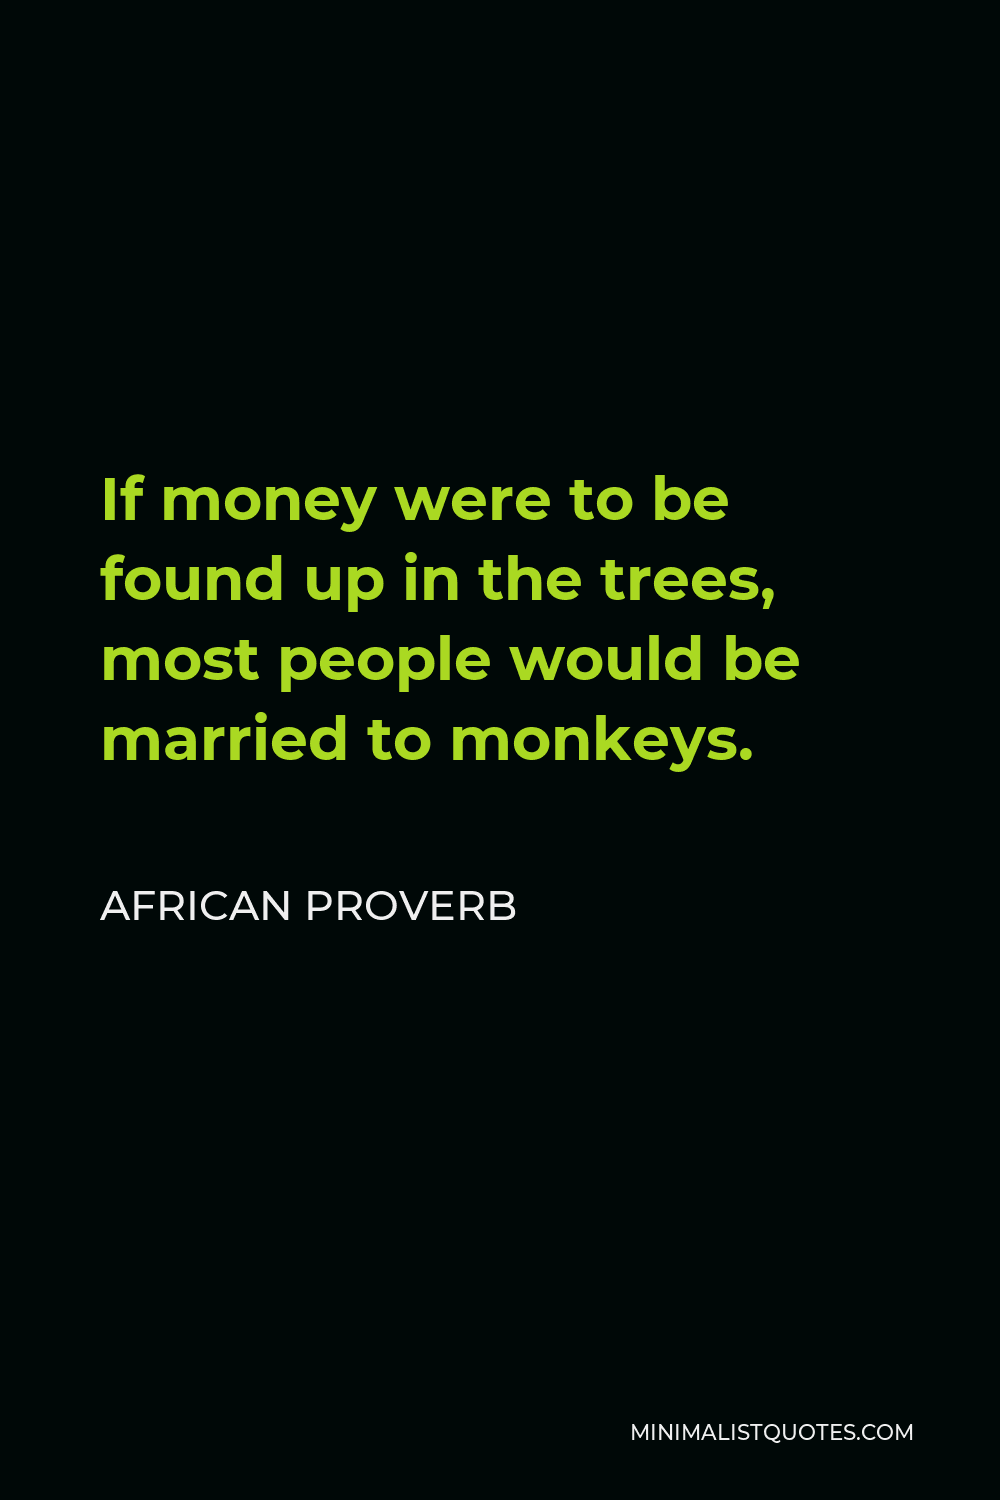 African Proverb Quote - If money were to be found up in the trees, most people would be married to monkeys.